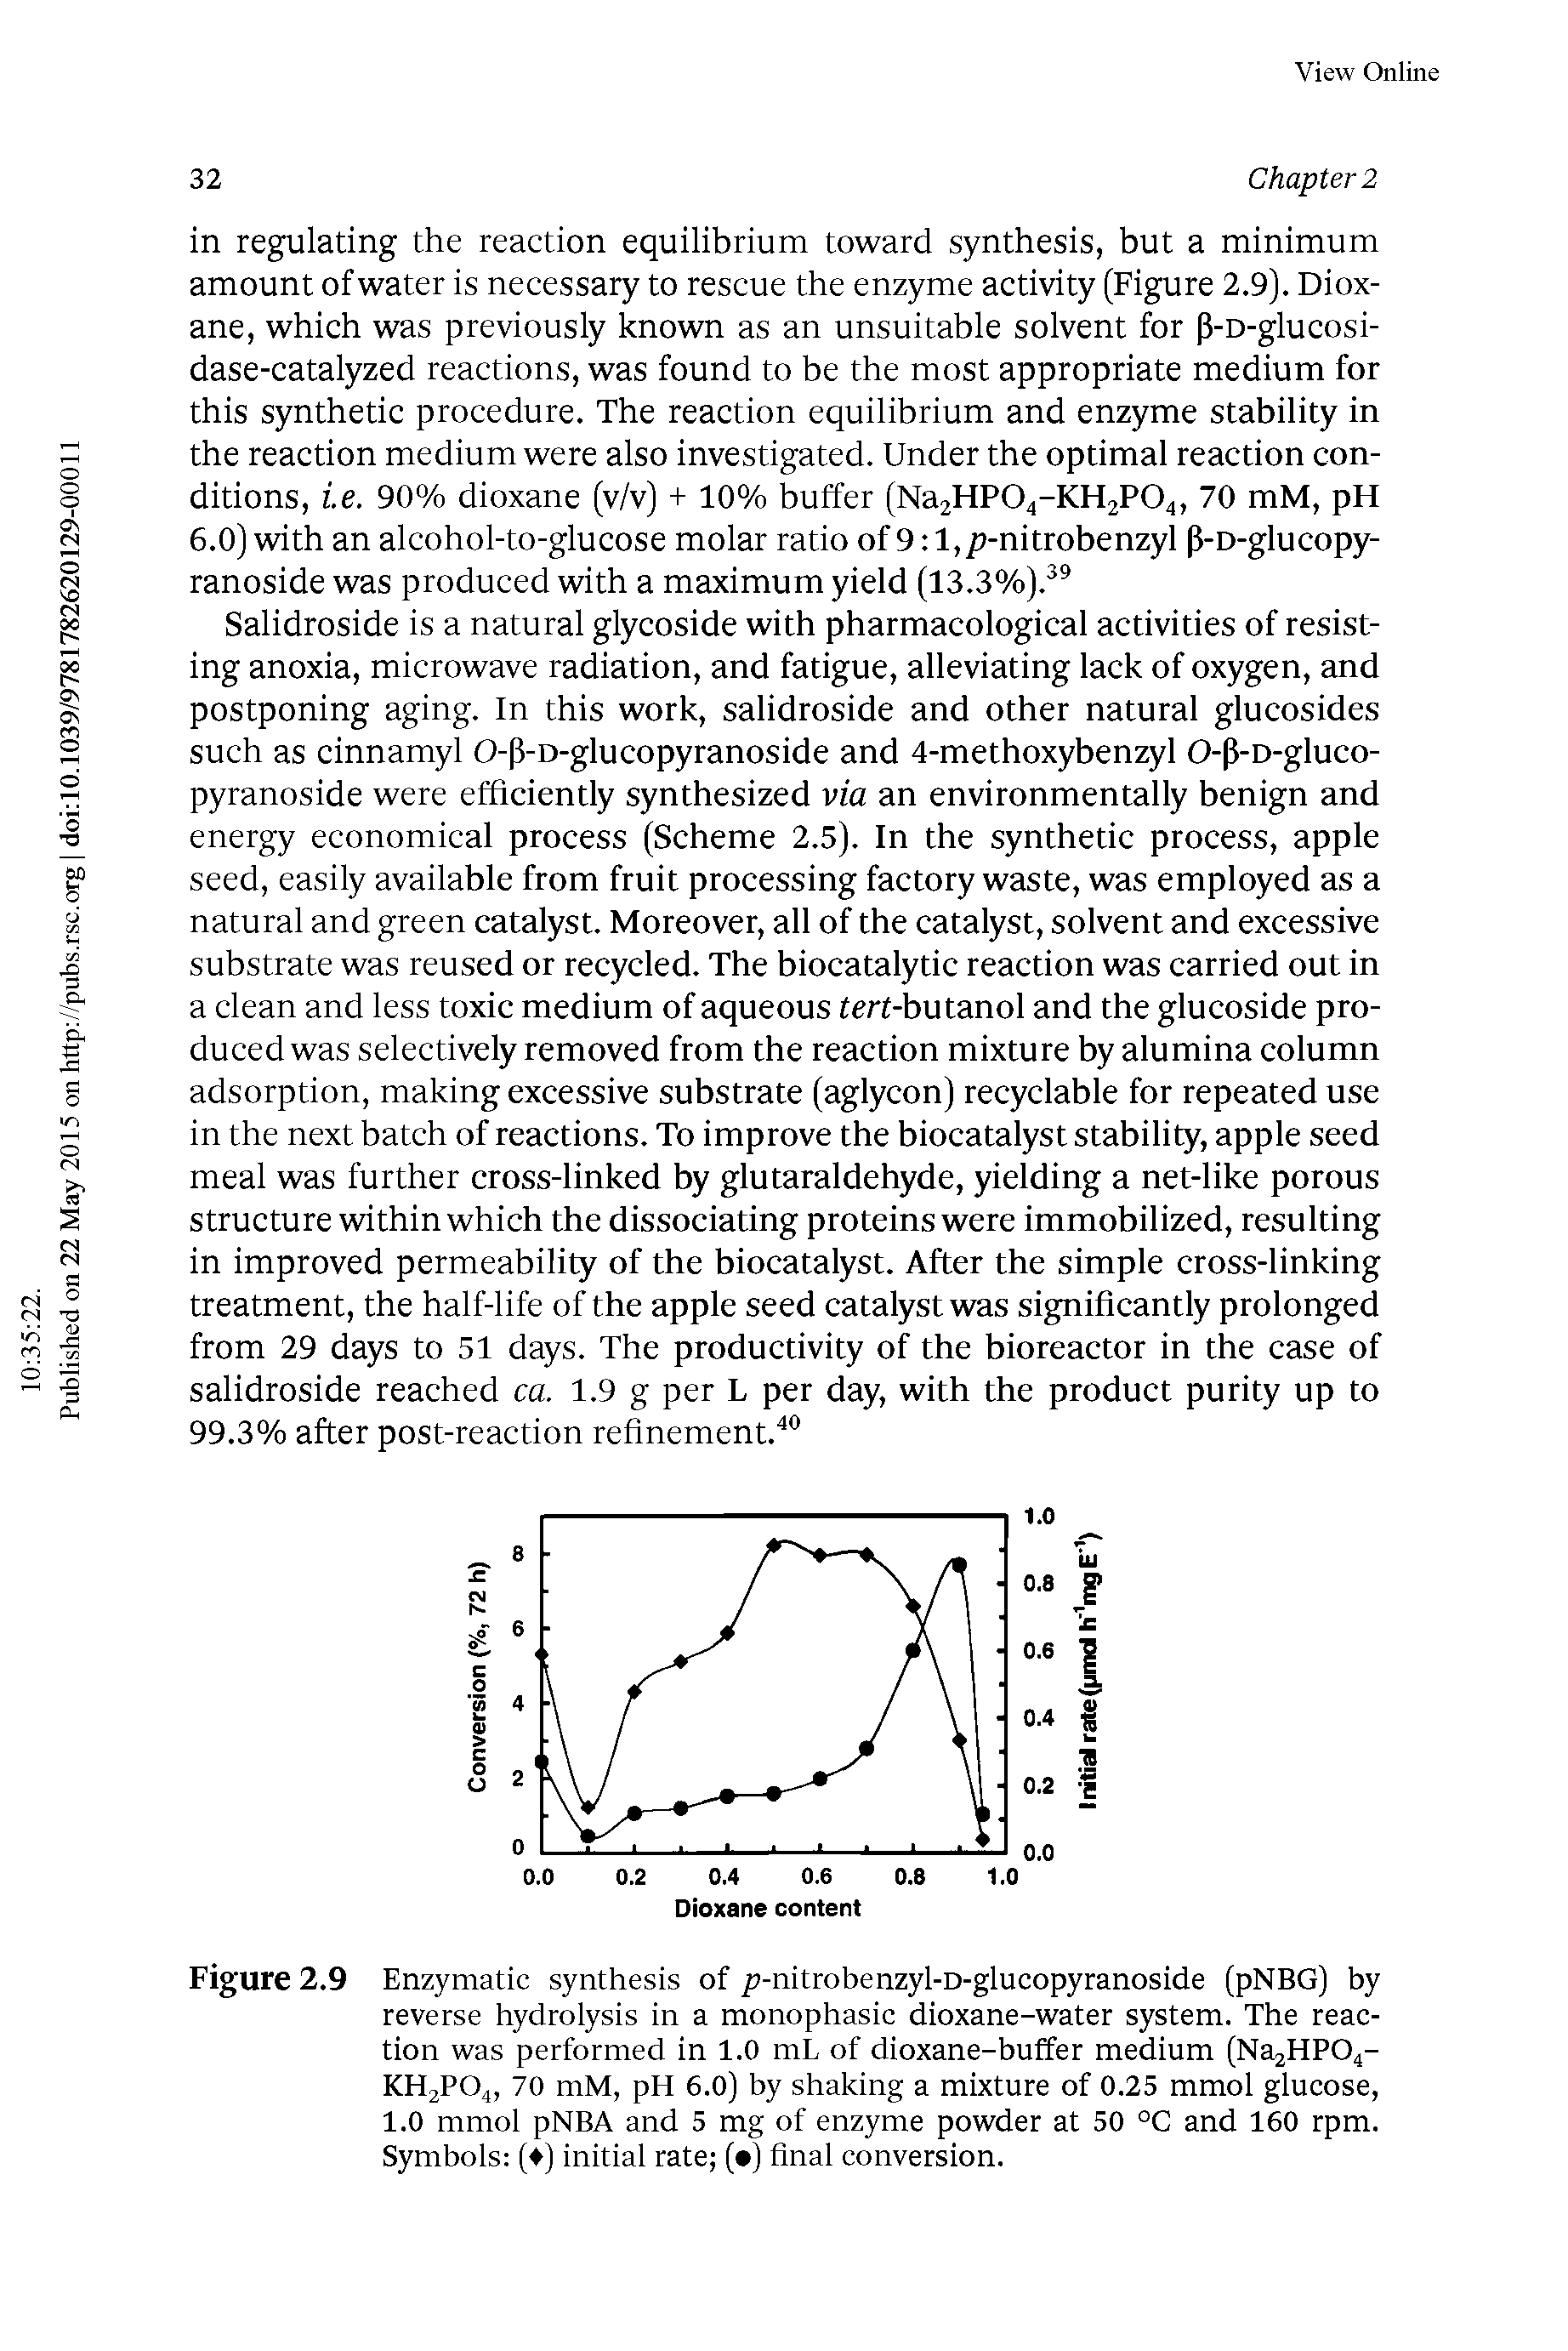 Figure 2.9 Enzymatic synthesis of jj-nitrobenzyl-D-glucopyranoside (pNBG) by reverse hydrolysis in a monophasic dioxane-water system. The reaction was performed in 1.0 mL of dioxane-buffer medium (Na2HP04-KH2PO4, 70 mM, pH 6.0) by shaking a mixture of 0.25 mmol glucose, 1.0 mmol pNBA and 5 mg of enzyme powder at 50 °C and 160 rpm. Symbols ( ) initial rate ( ) final conversion.